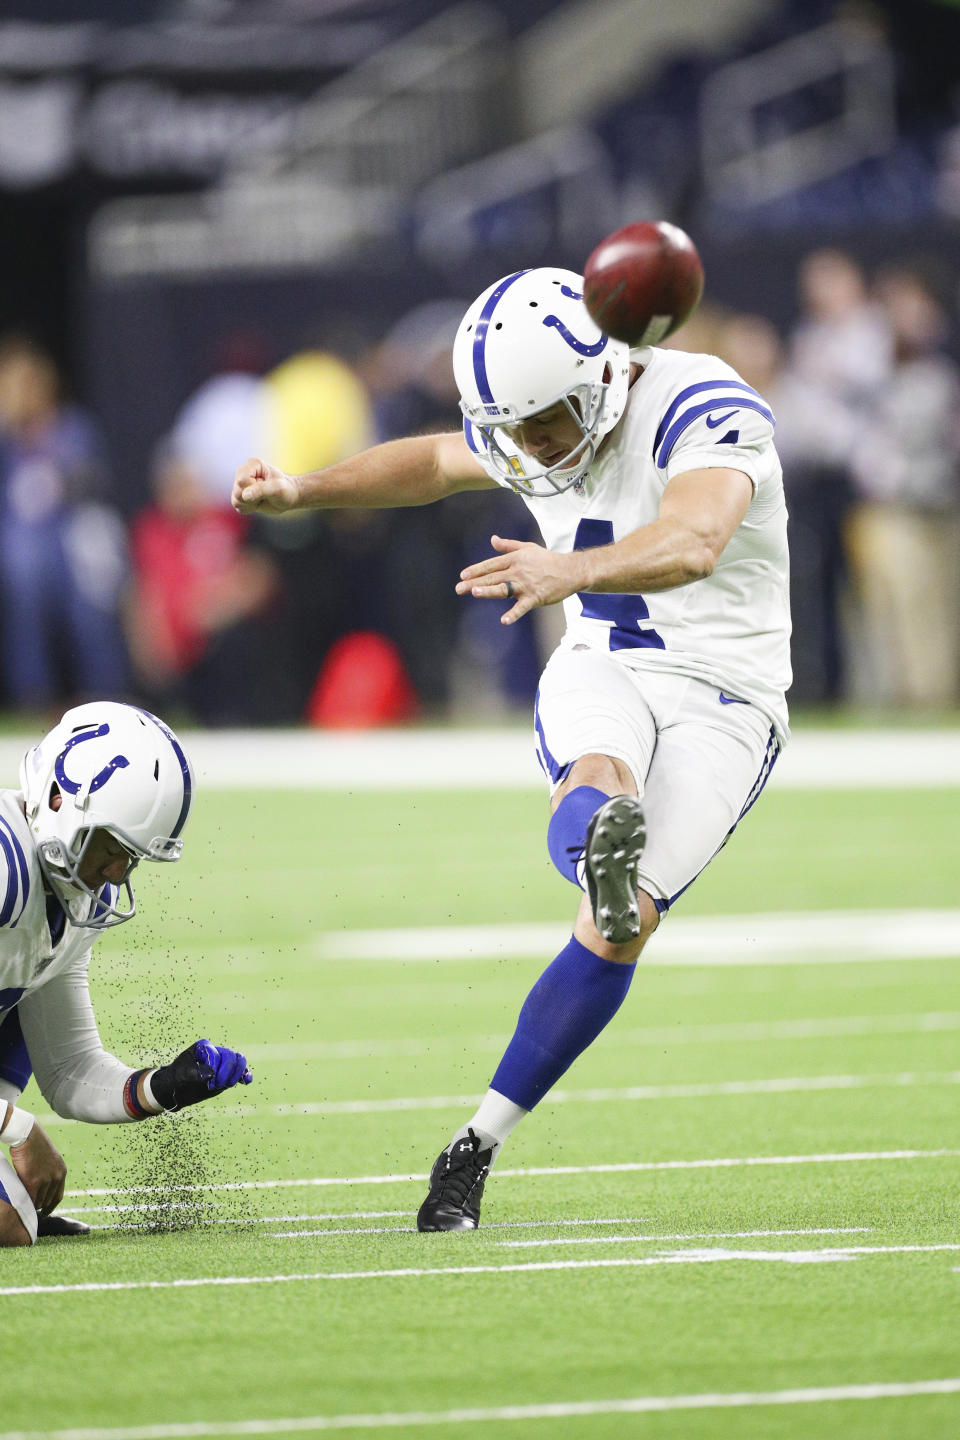 Indianapolis Colts kicker Adam Vinatieri (4) kicks a field goal during warm-ups in an NFL game against the Houston Texans, Thursday, Nov. 21, 2019 in Houston. The Texans defeated the Colts 20-17. (Margaret Bowles via AP)